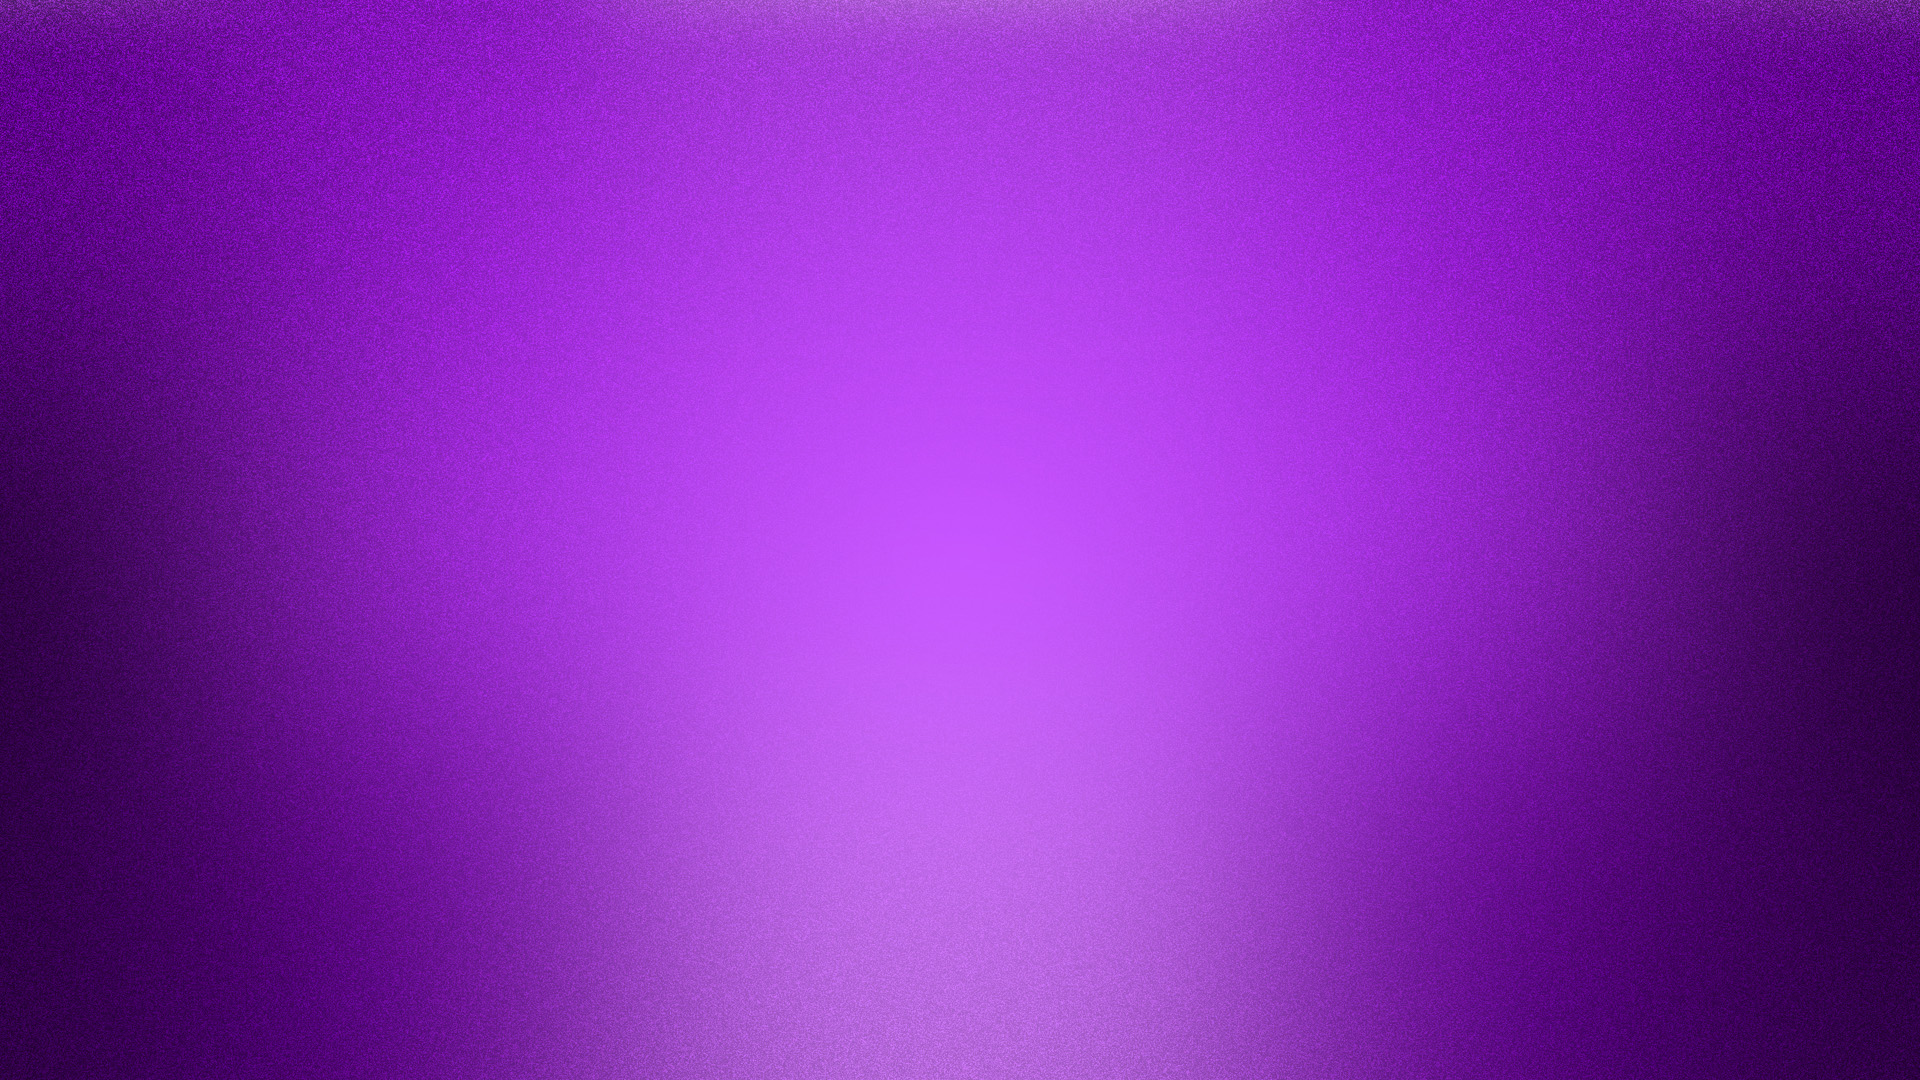 high definition purple background wallpaper images download